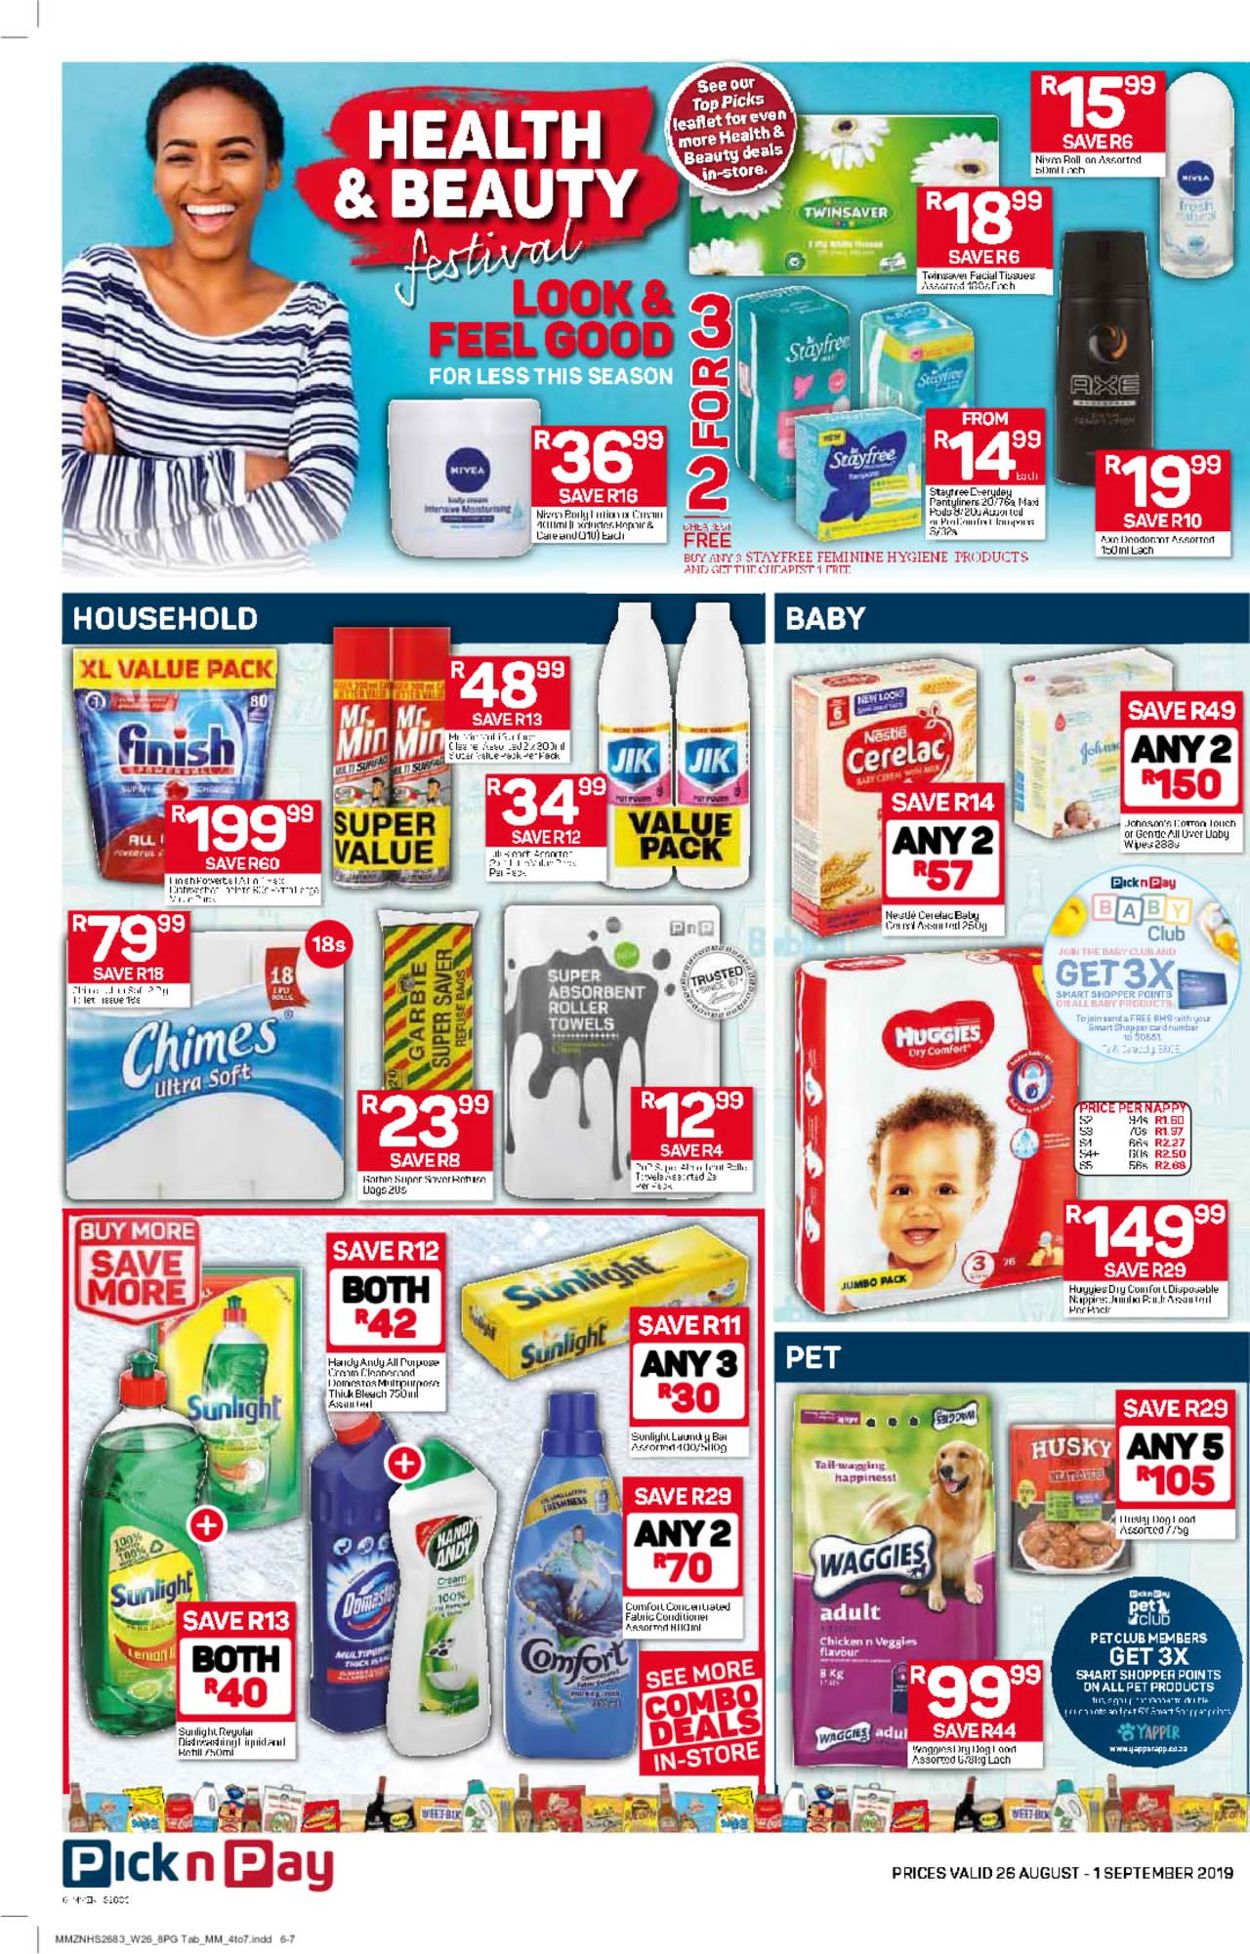 Pick n Pay Catalogue - 2019/08/26-2019/09/01 (Page 6)